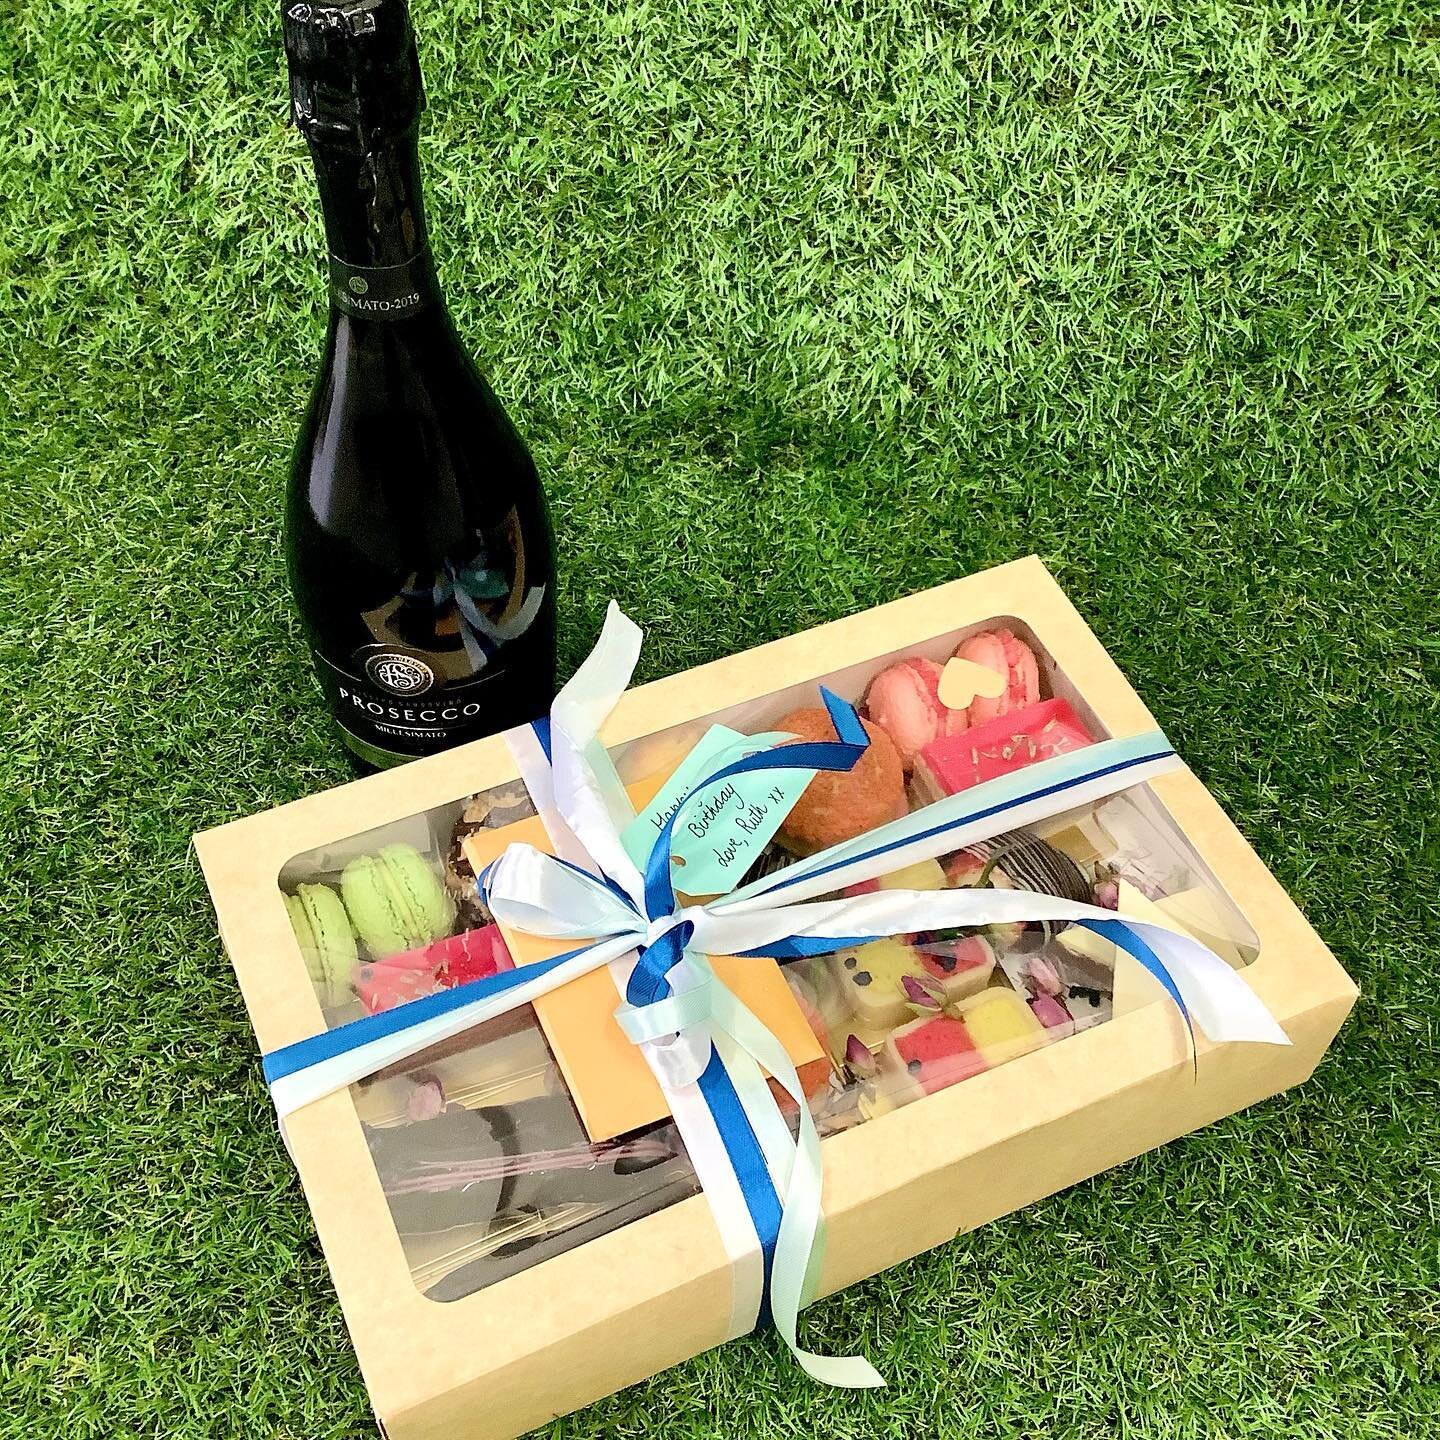 Congratulations to Ruth in Northamptonshire, the Fuller&rsquo;s 12 Days of Christmas Winner of our Afternoon Tea box. Handmade and delivered, a gift for a birthday celebration this weekend - Perfect! @fullers #afternoontea #competition #winner #birth